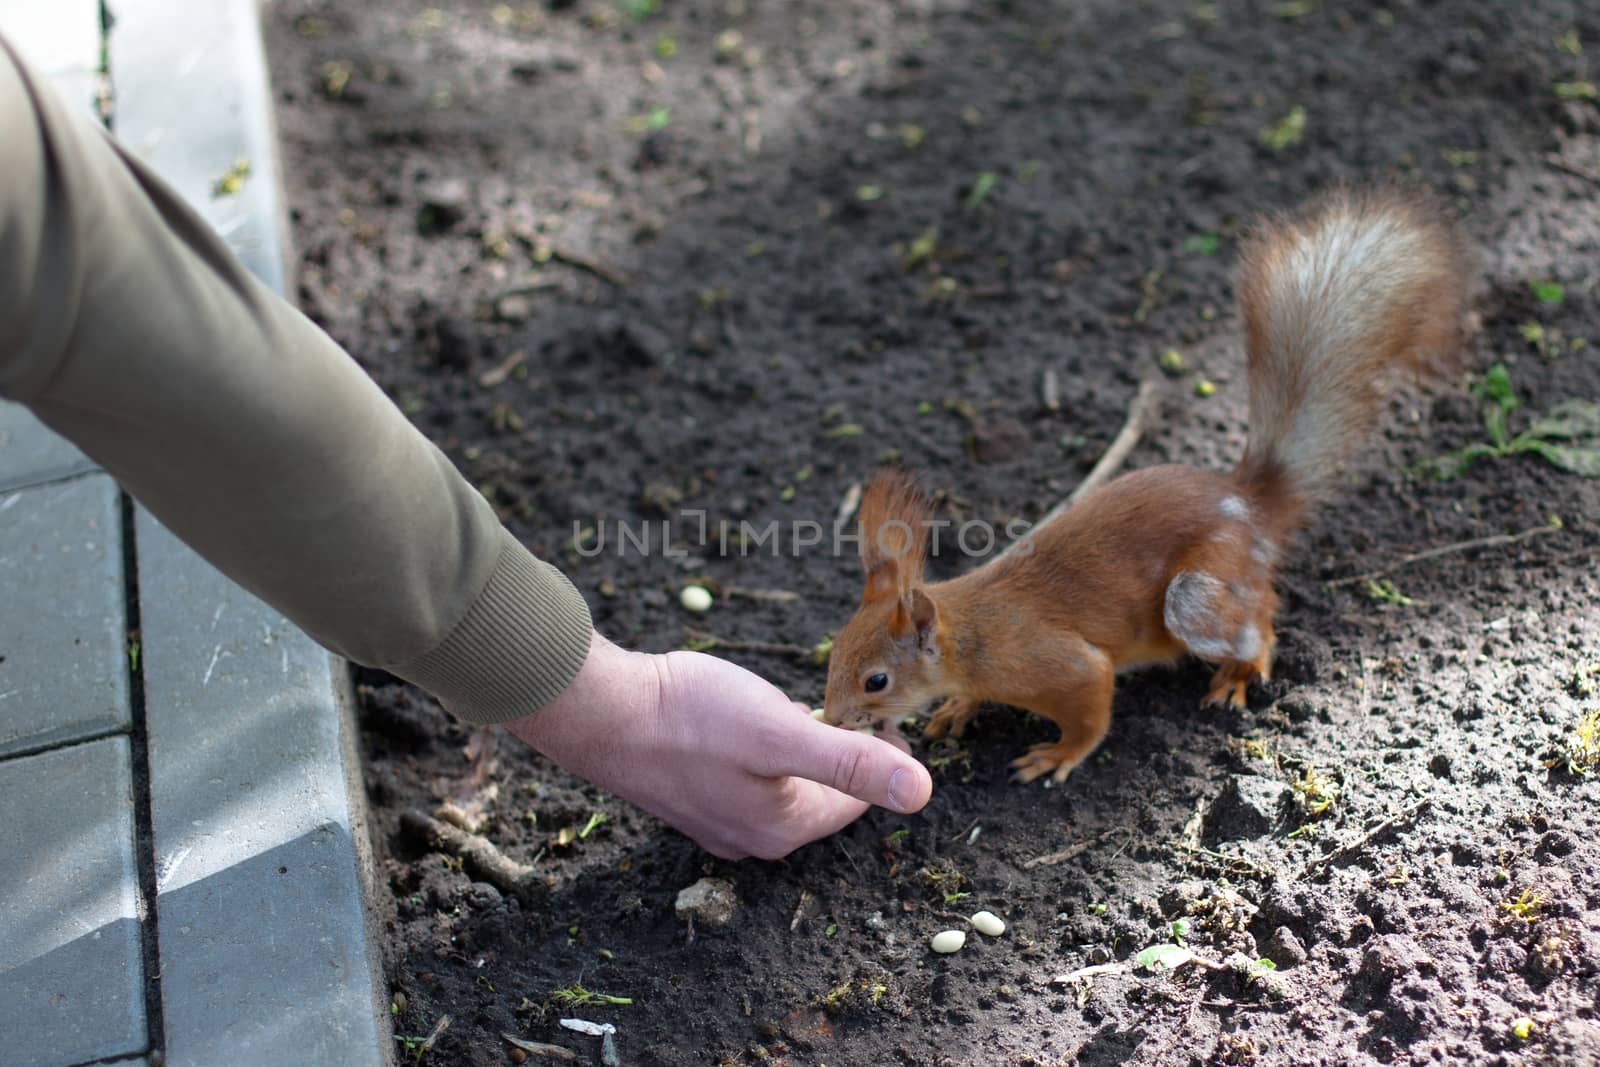 man hand giving a food for redsquirrel
